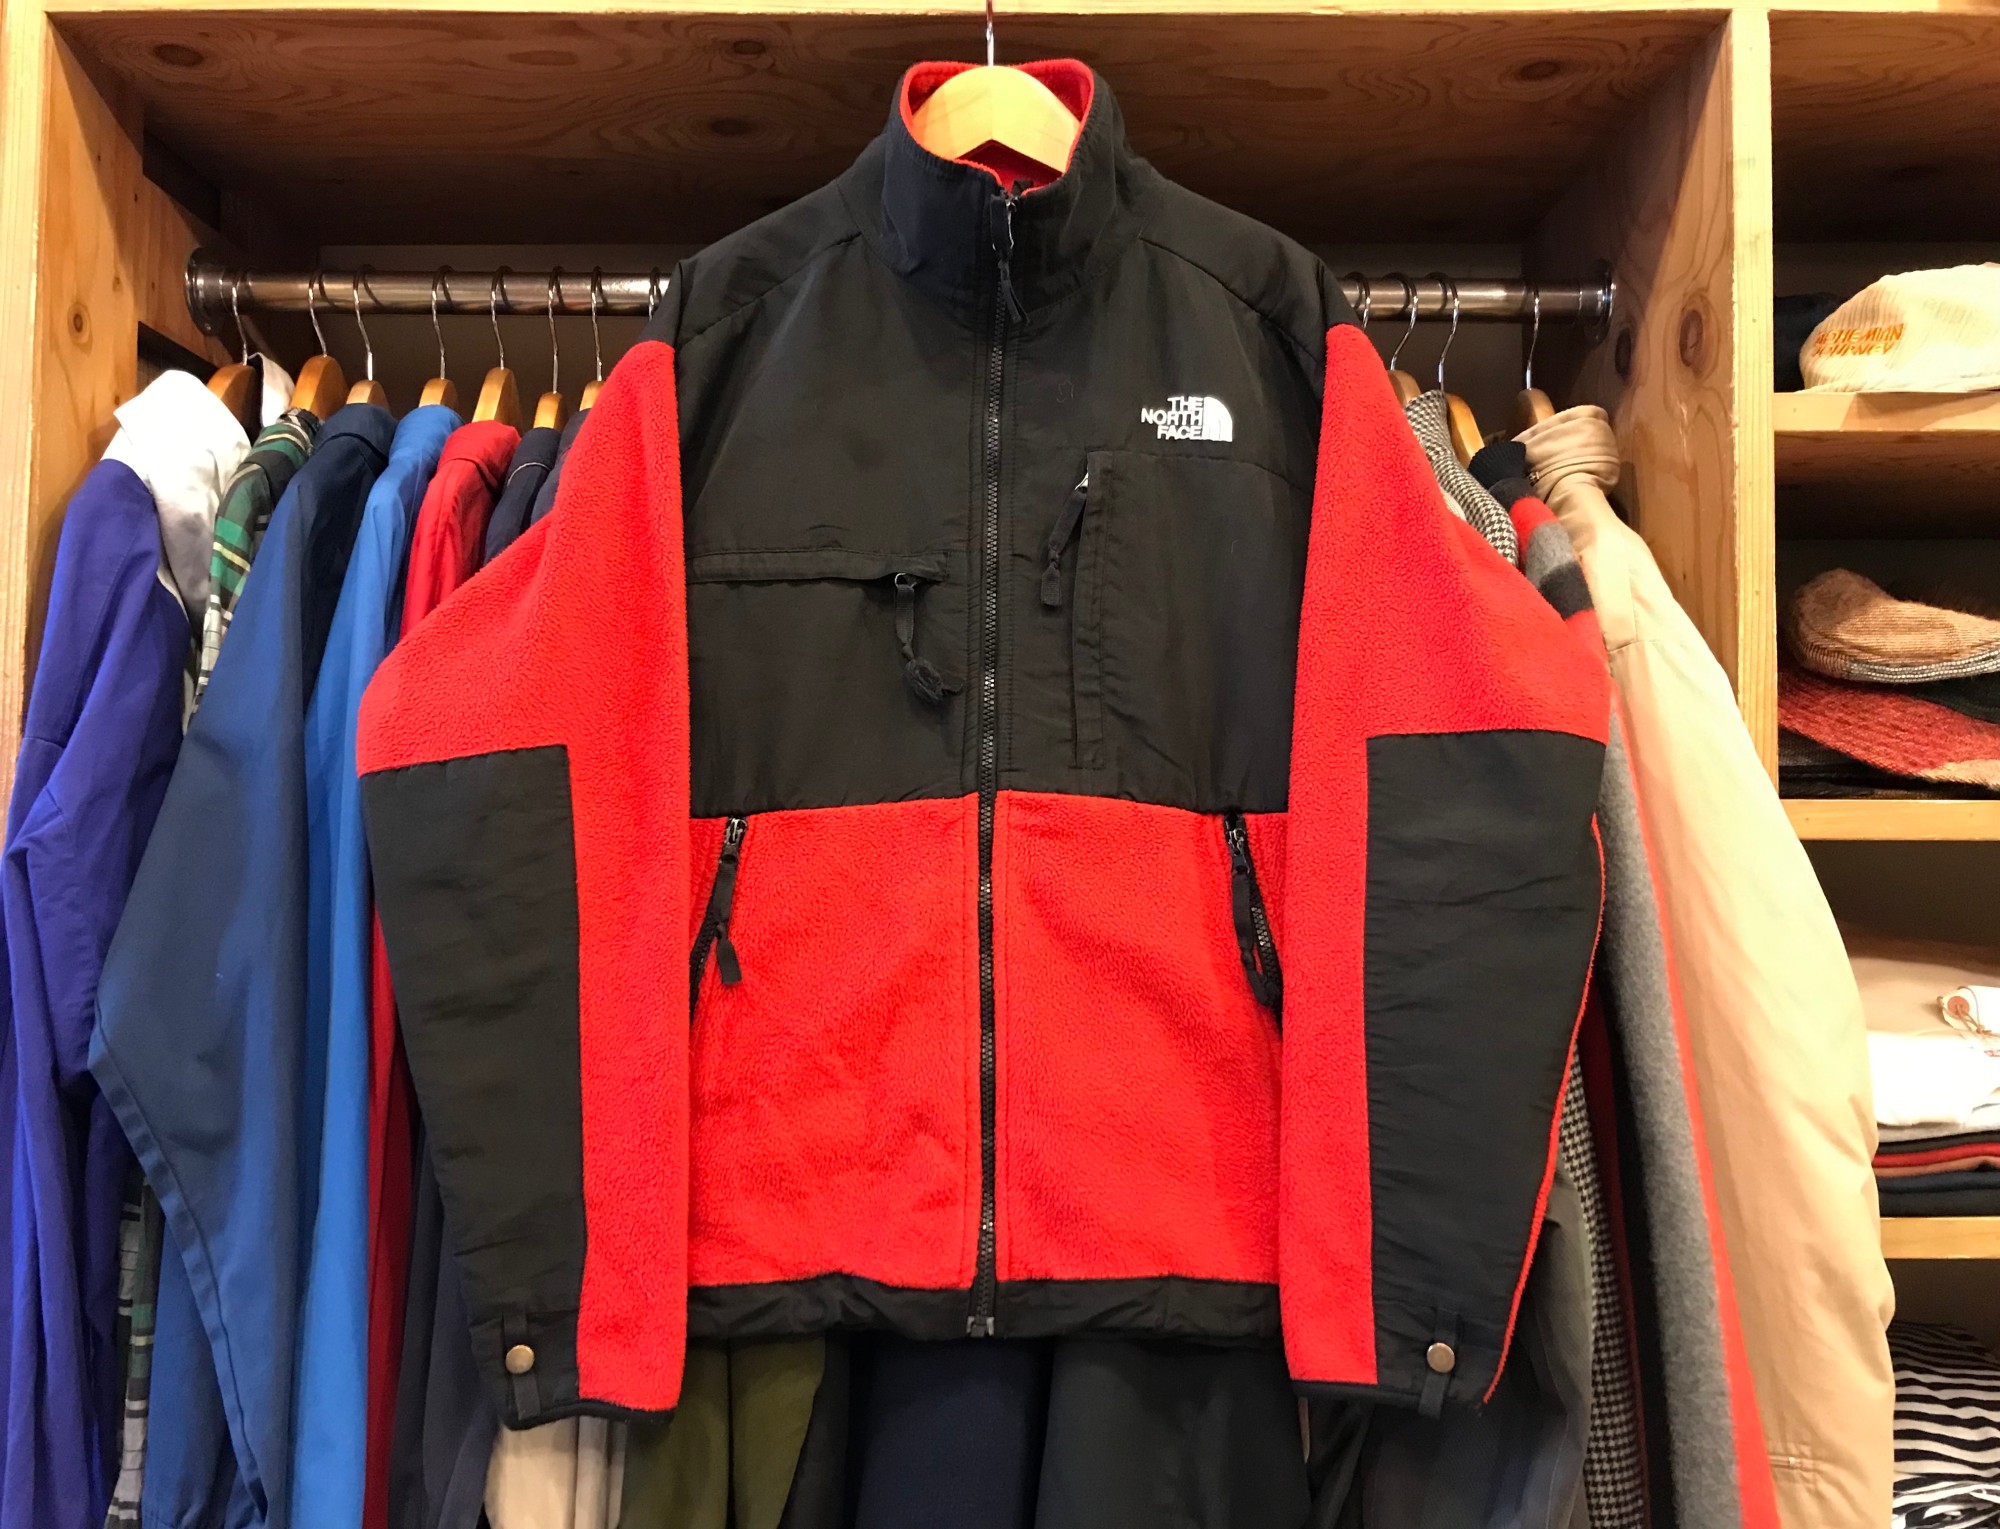 "THE NORTH FACE" デナリジャケット